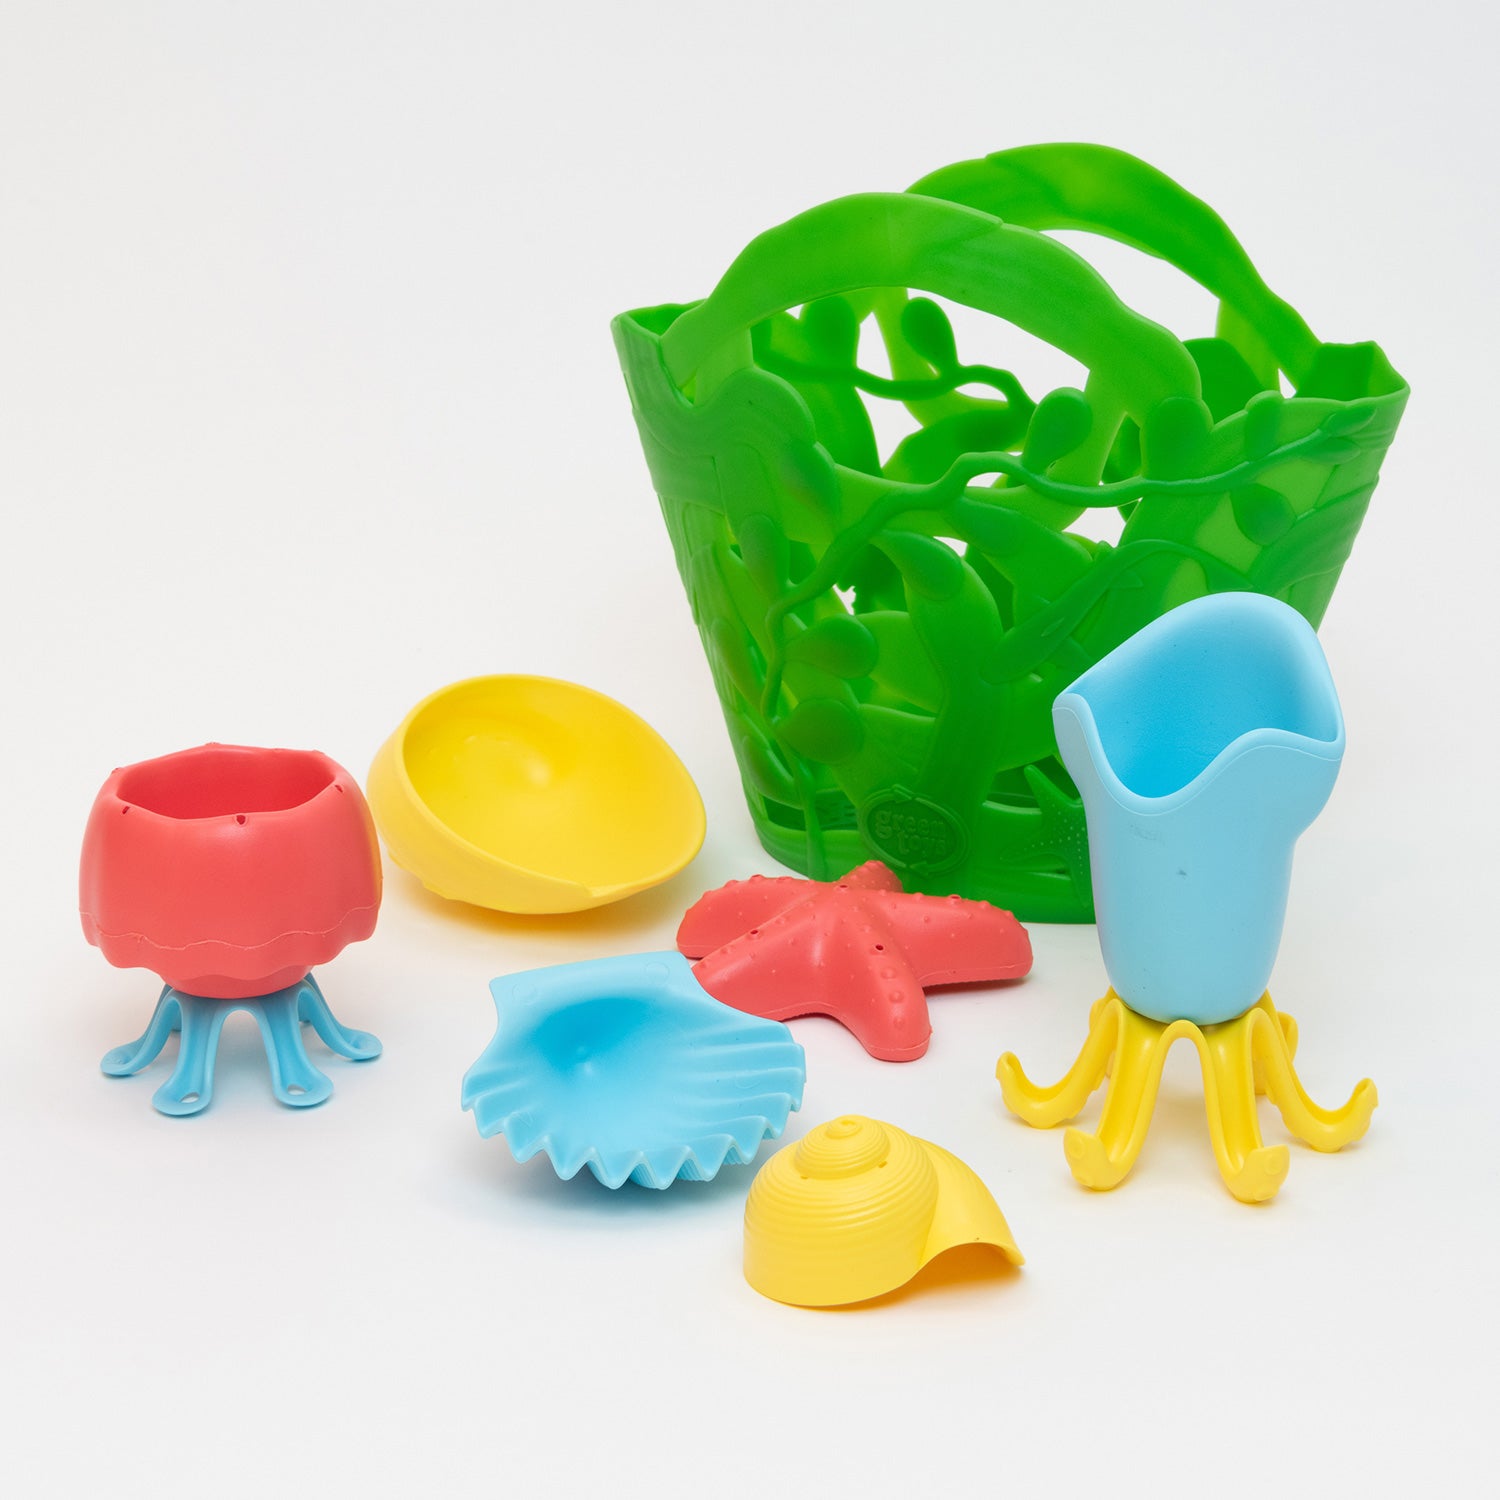 Green Toys Tide Pool Bath Set. Green Plastic seaweed bucket with coloured plastic sealife toys 7 peice set. Including yellow shells, orange starfish & jellyfish, blue shell and octopus.